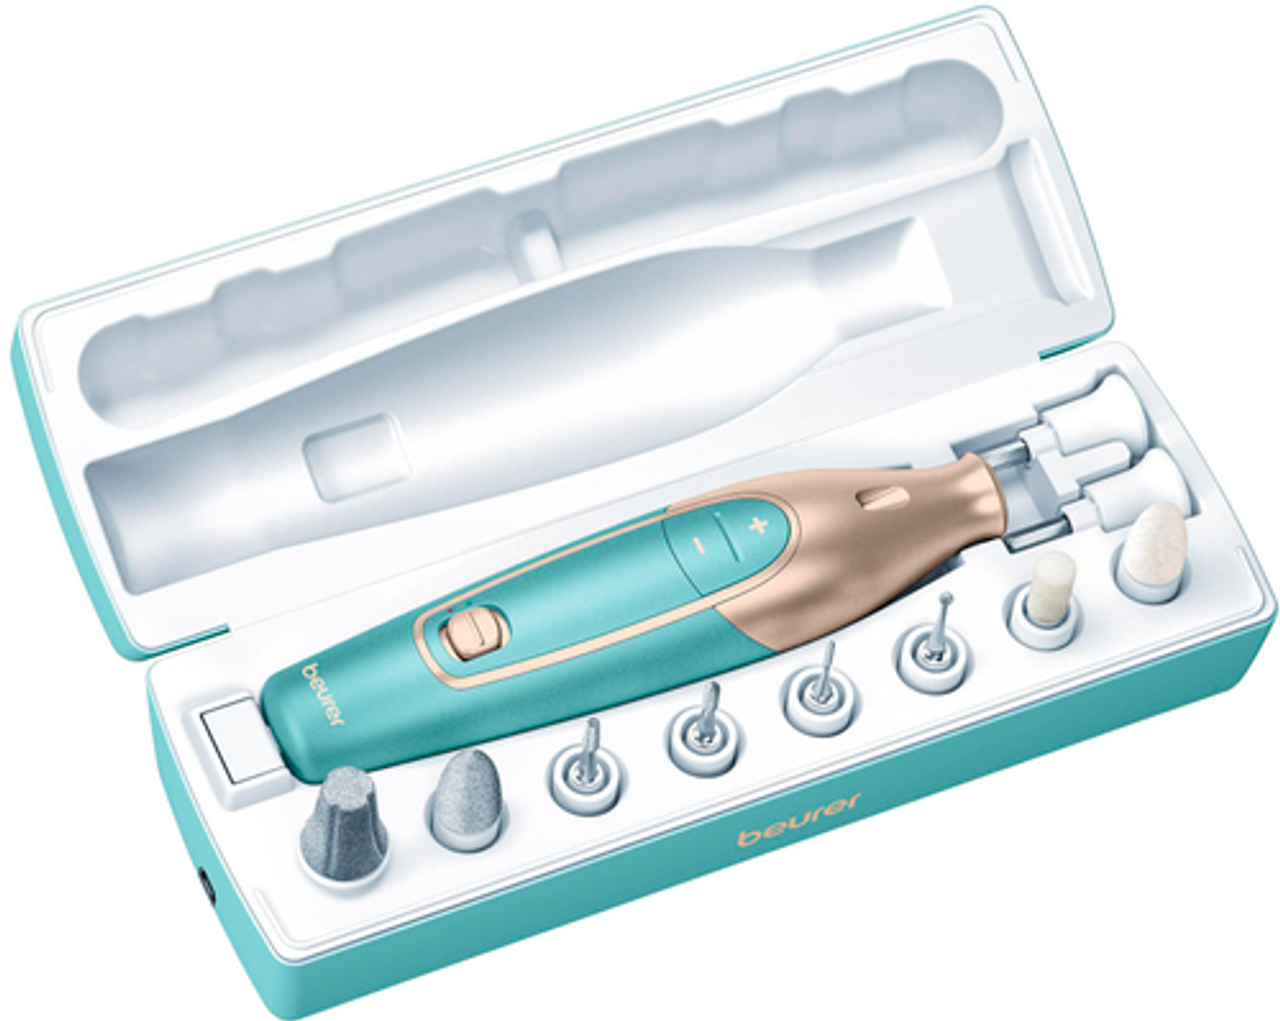 Beurer - Rechargeable Manicure/Pedicure Device - Turquoise/Gold